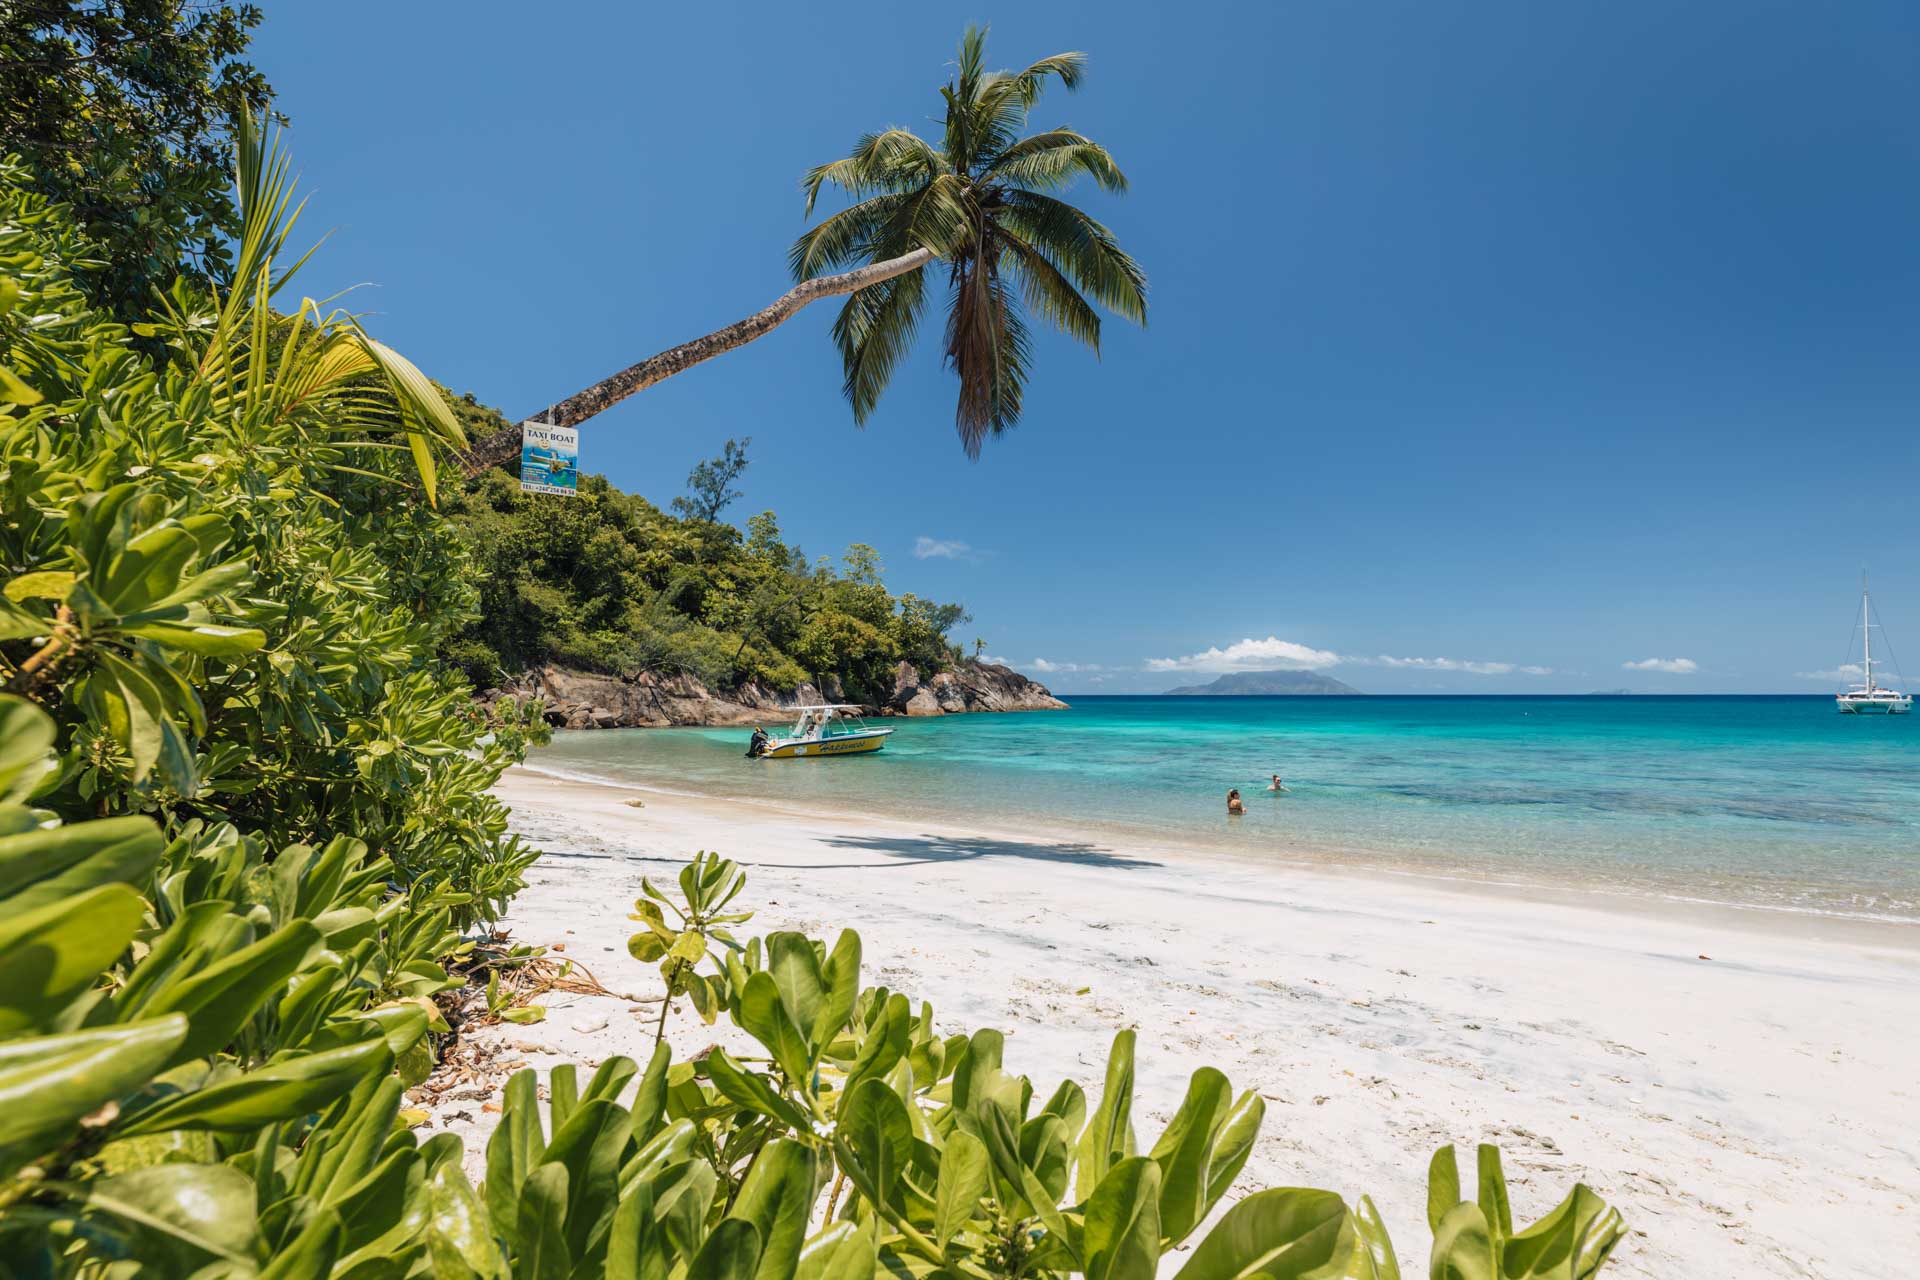 things to do in mahe, things to do in mahe island, things to do on mahe seychelles, mahe island, mahe island seychelles, places to visit in mahe, what to do in mahe